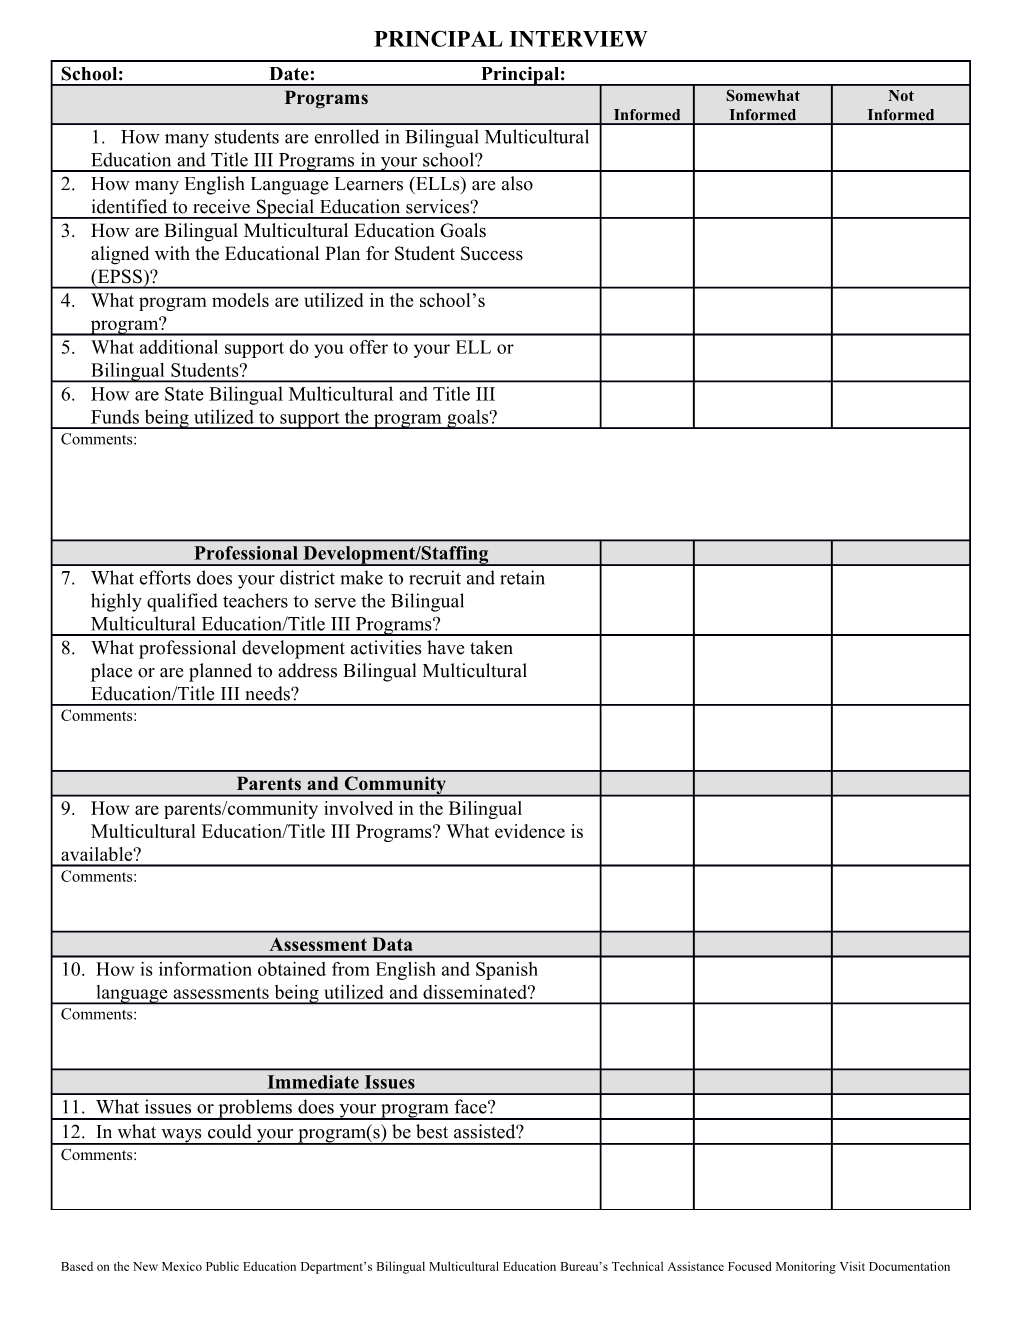 Rubric for Program Director and Principal Interview Questionnaire